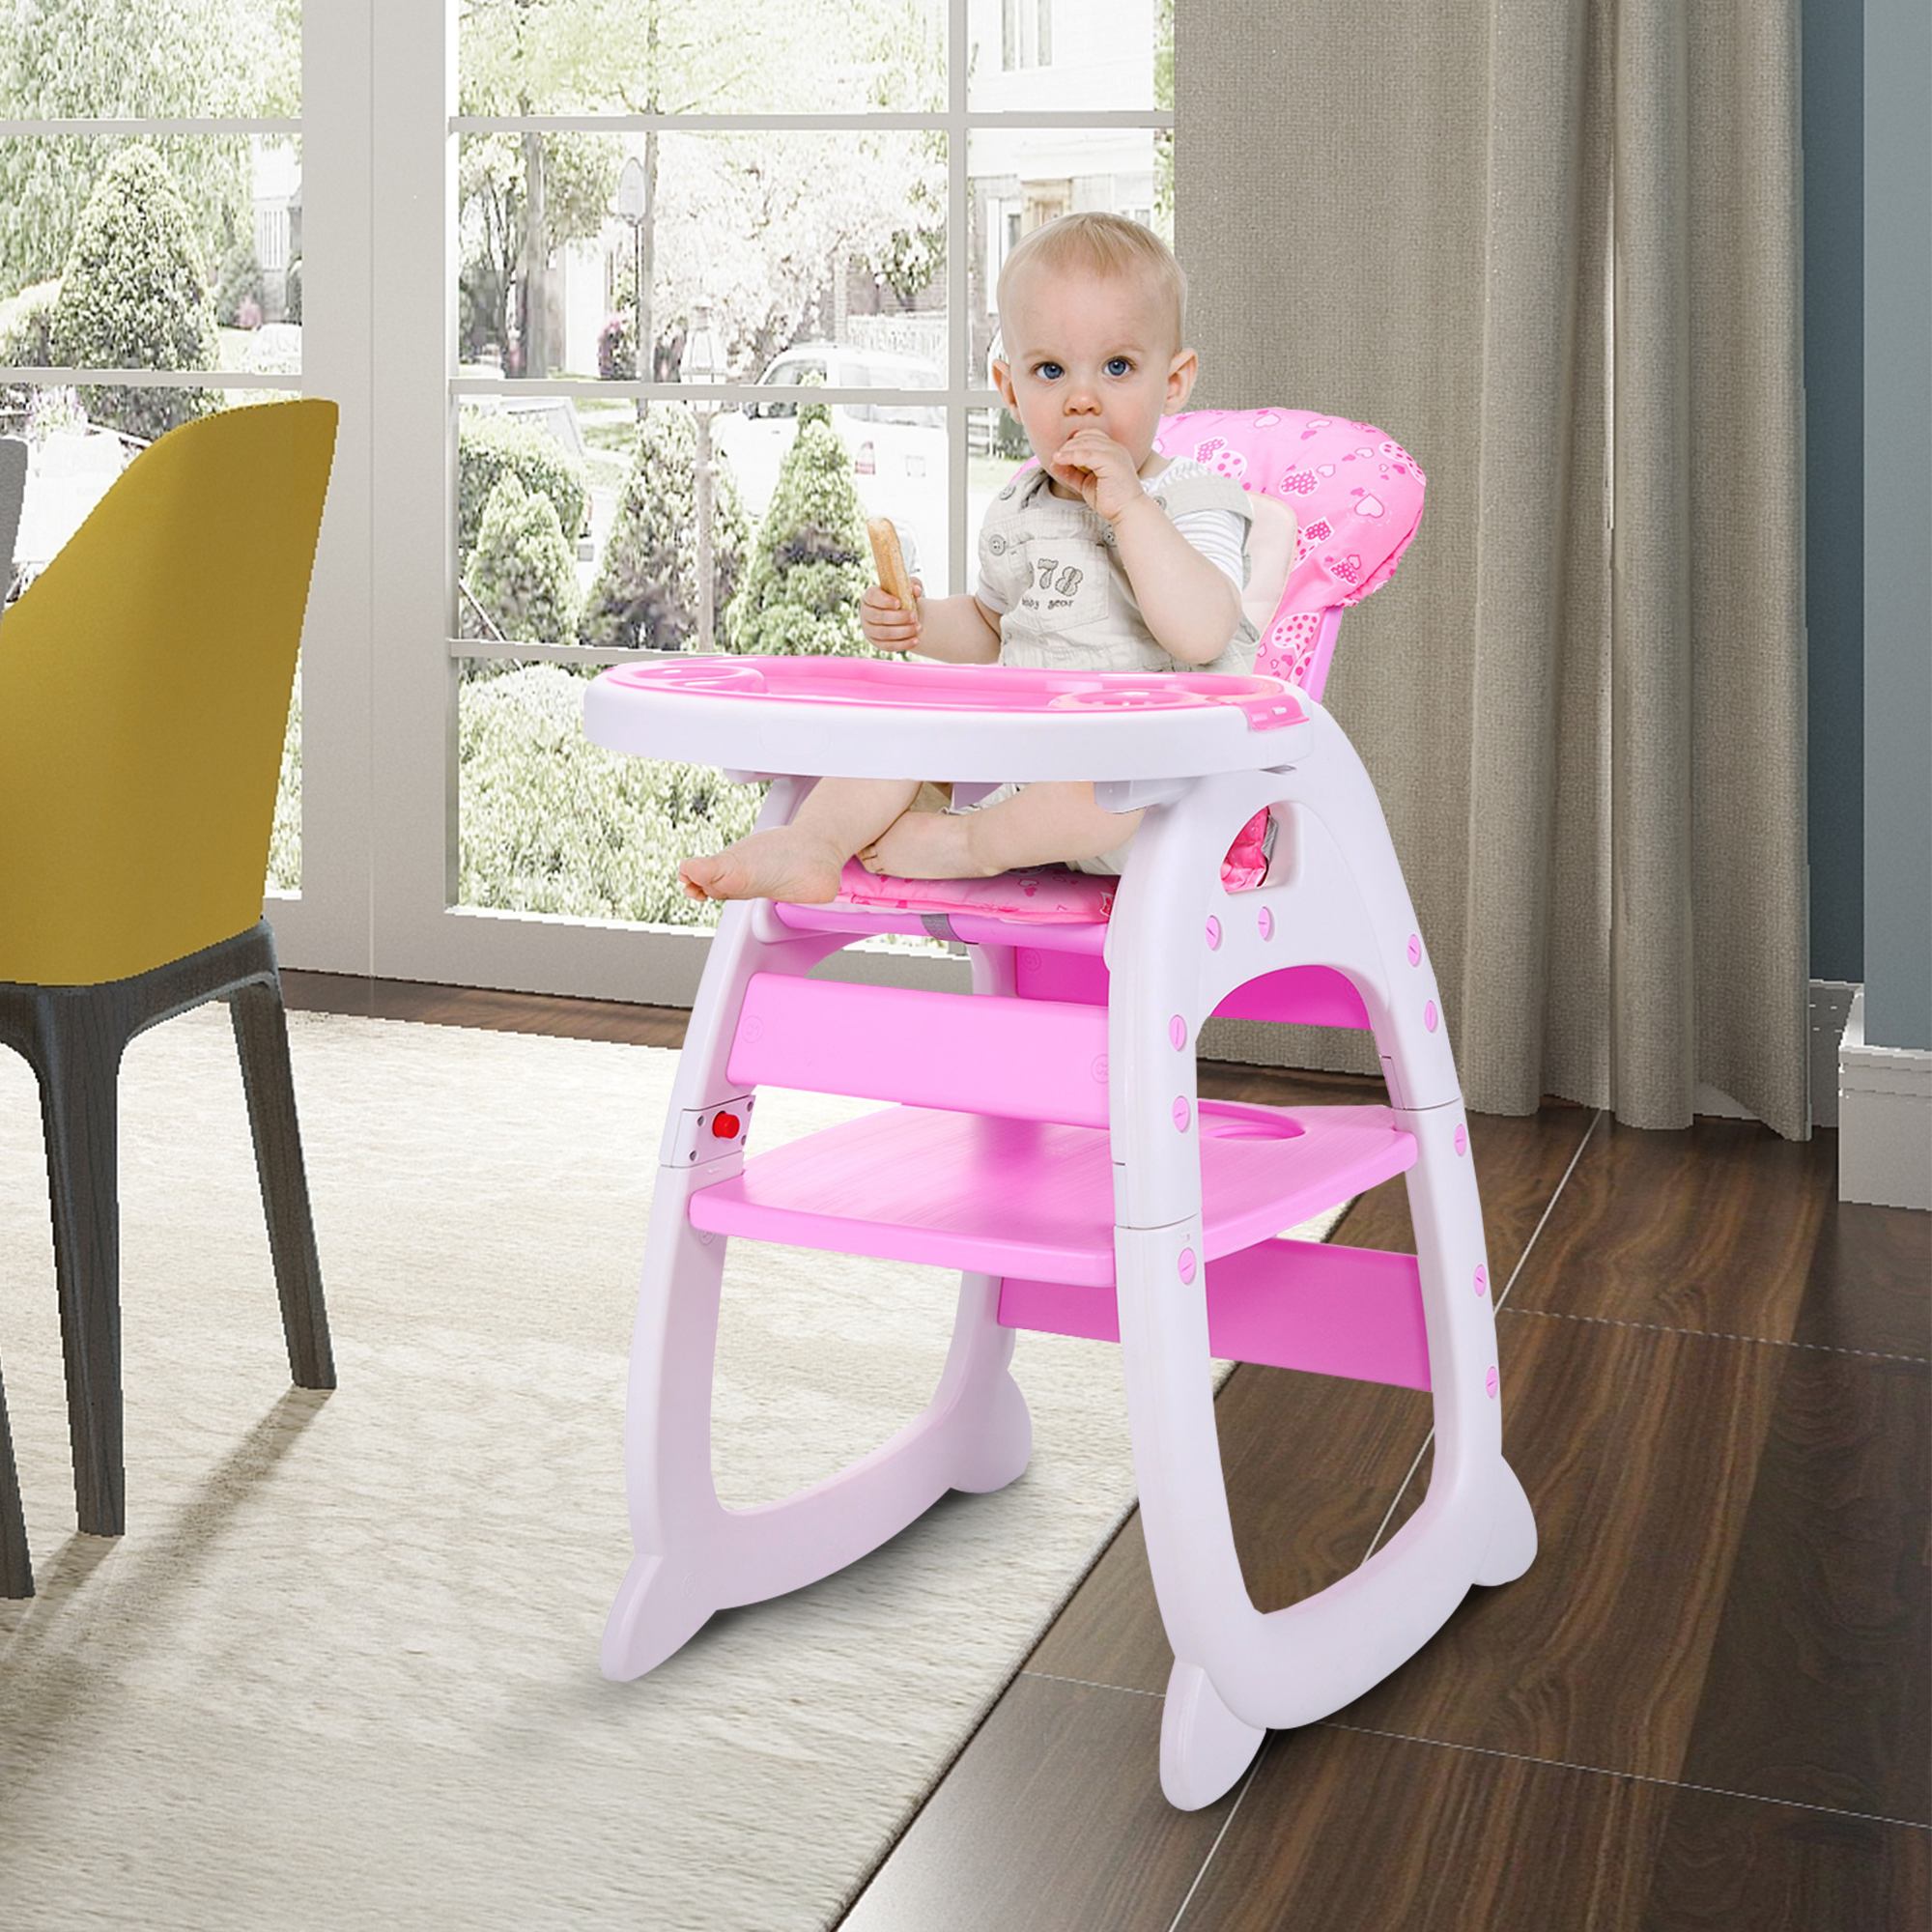 Multipurpose Adjustable Highchair for Baby Toddler Dinning Table with Feeding Tray and 5-Point Safety Buckle, Pink-CASAINC